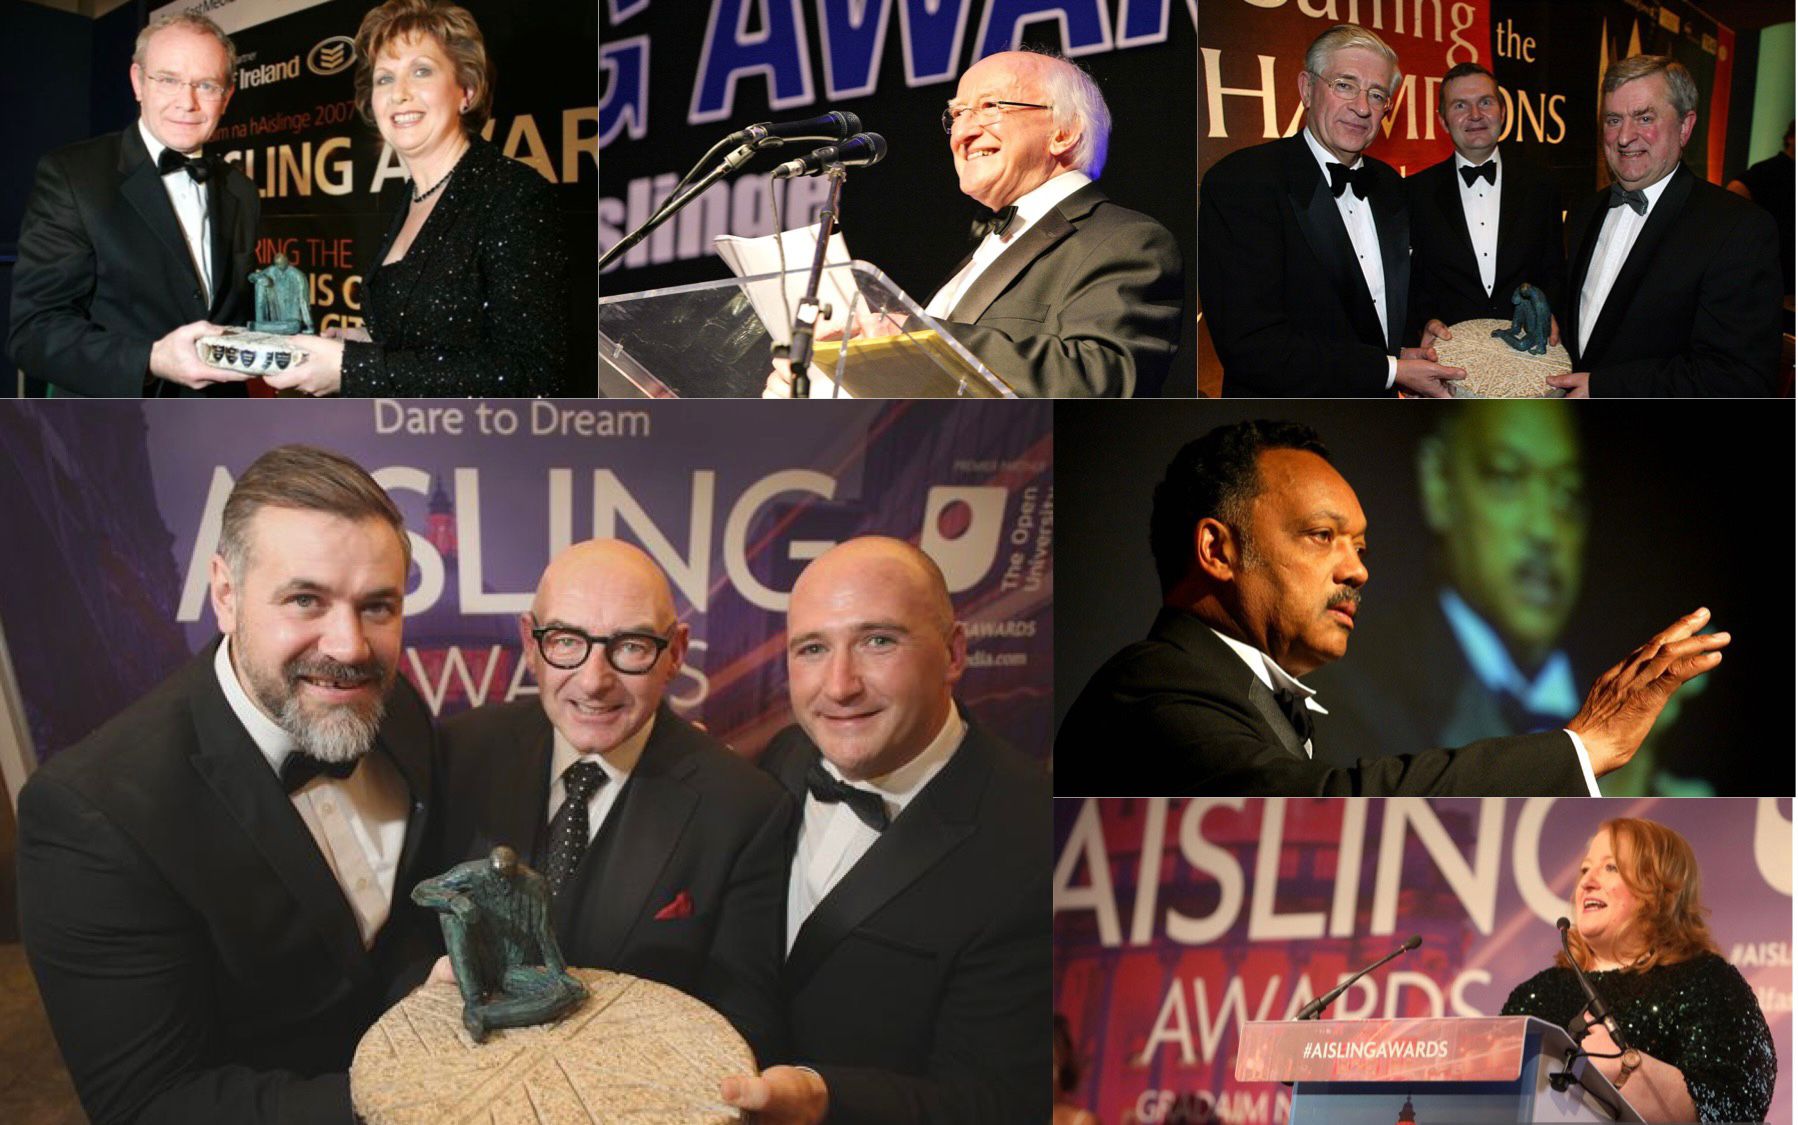 HEART OF THE COMMUNITY: Aisling Awards opens 27th chapter of celebrating unsung heroes